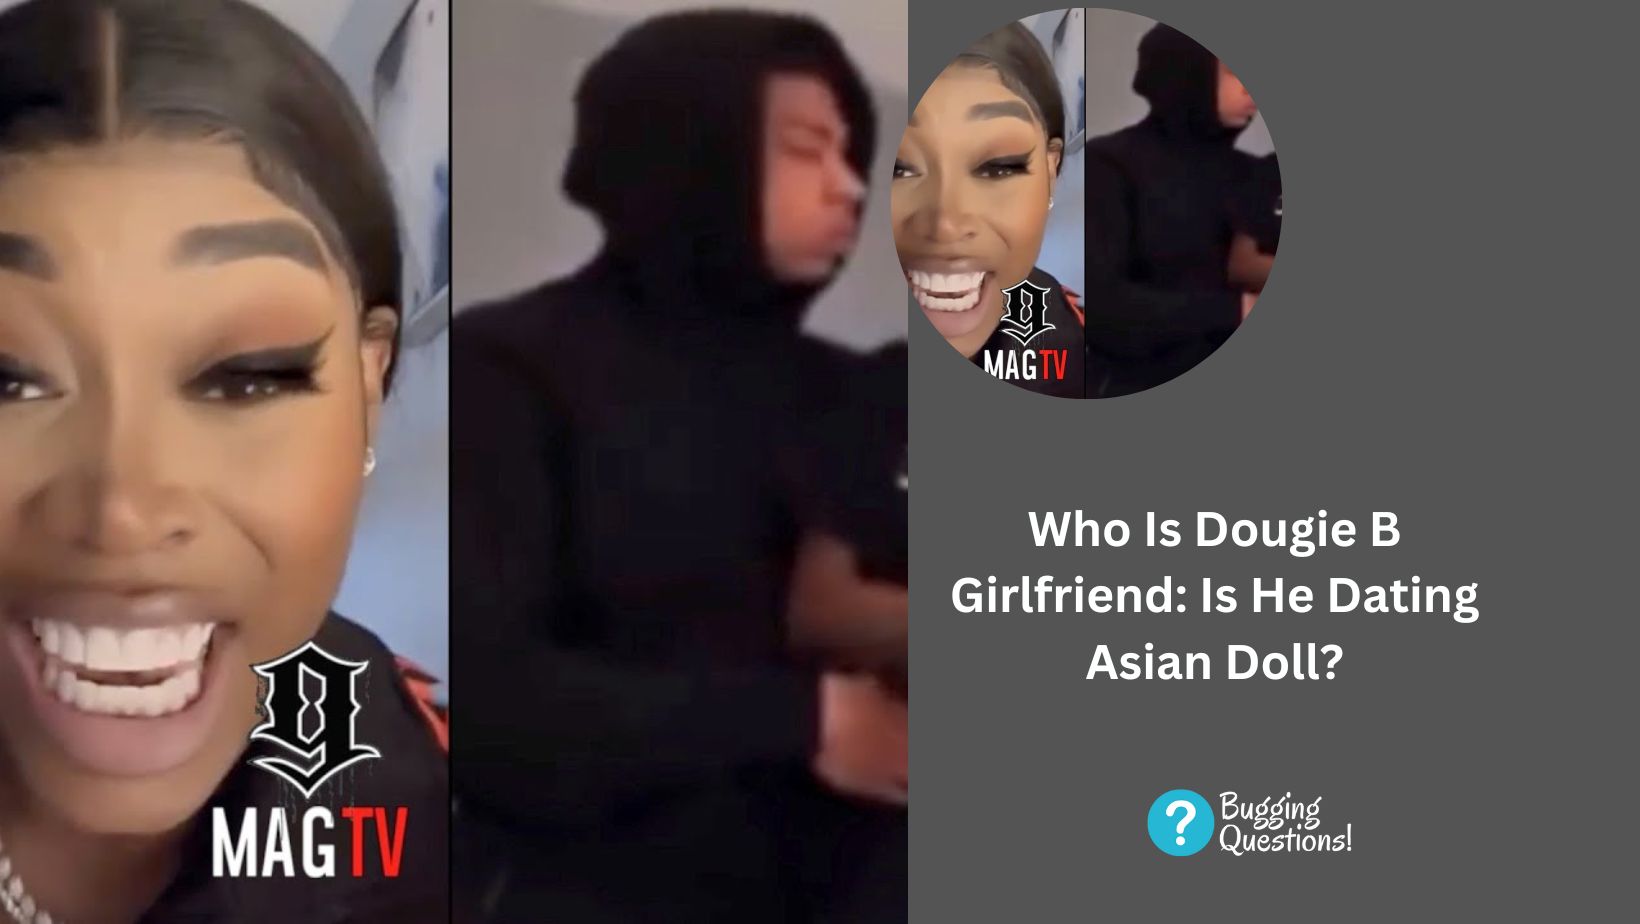 Who Is Dougie B Girlfriend: Is He Dating Asian Doll?